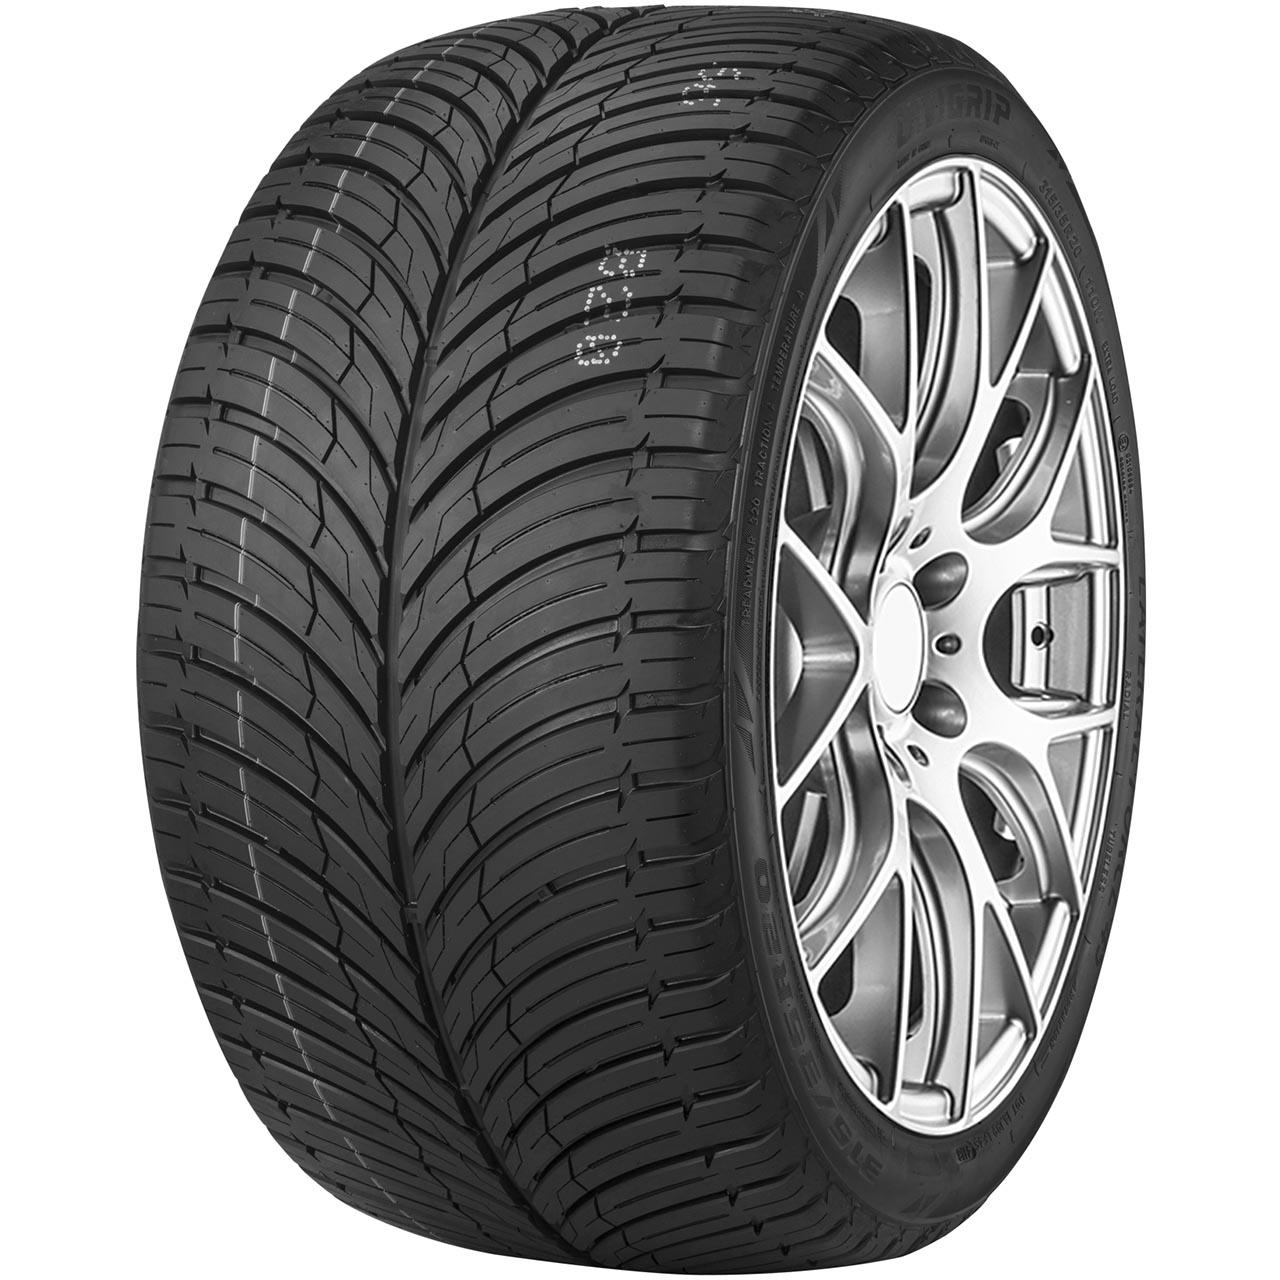 Unigrip Lateral Force 4S 255/50R19 107W XL